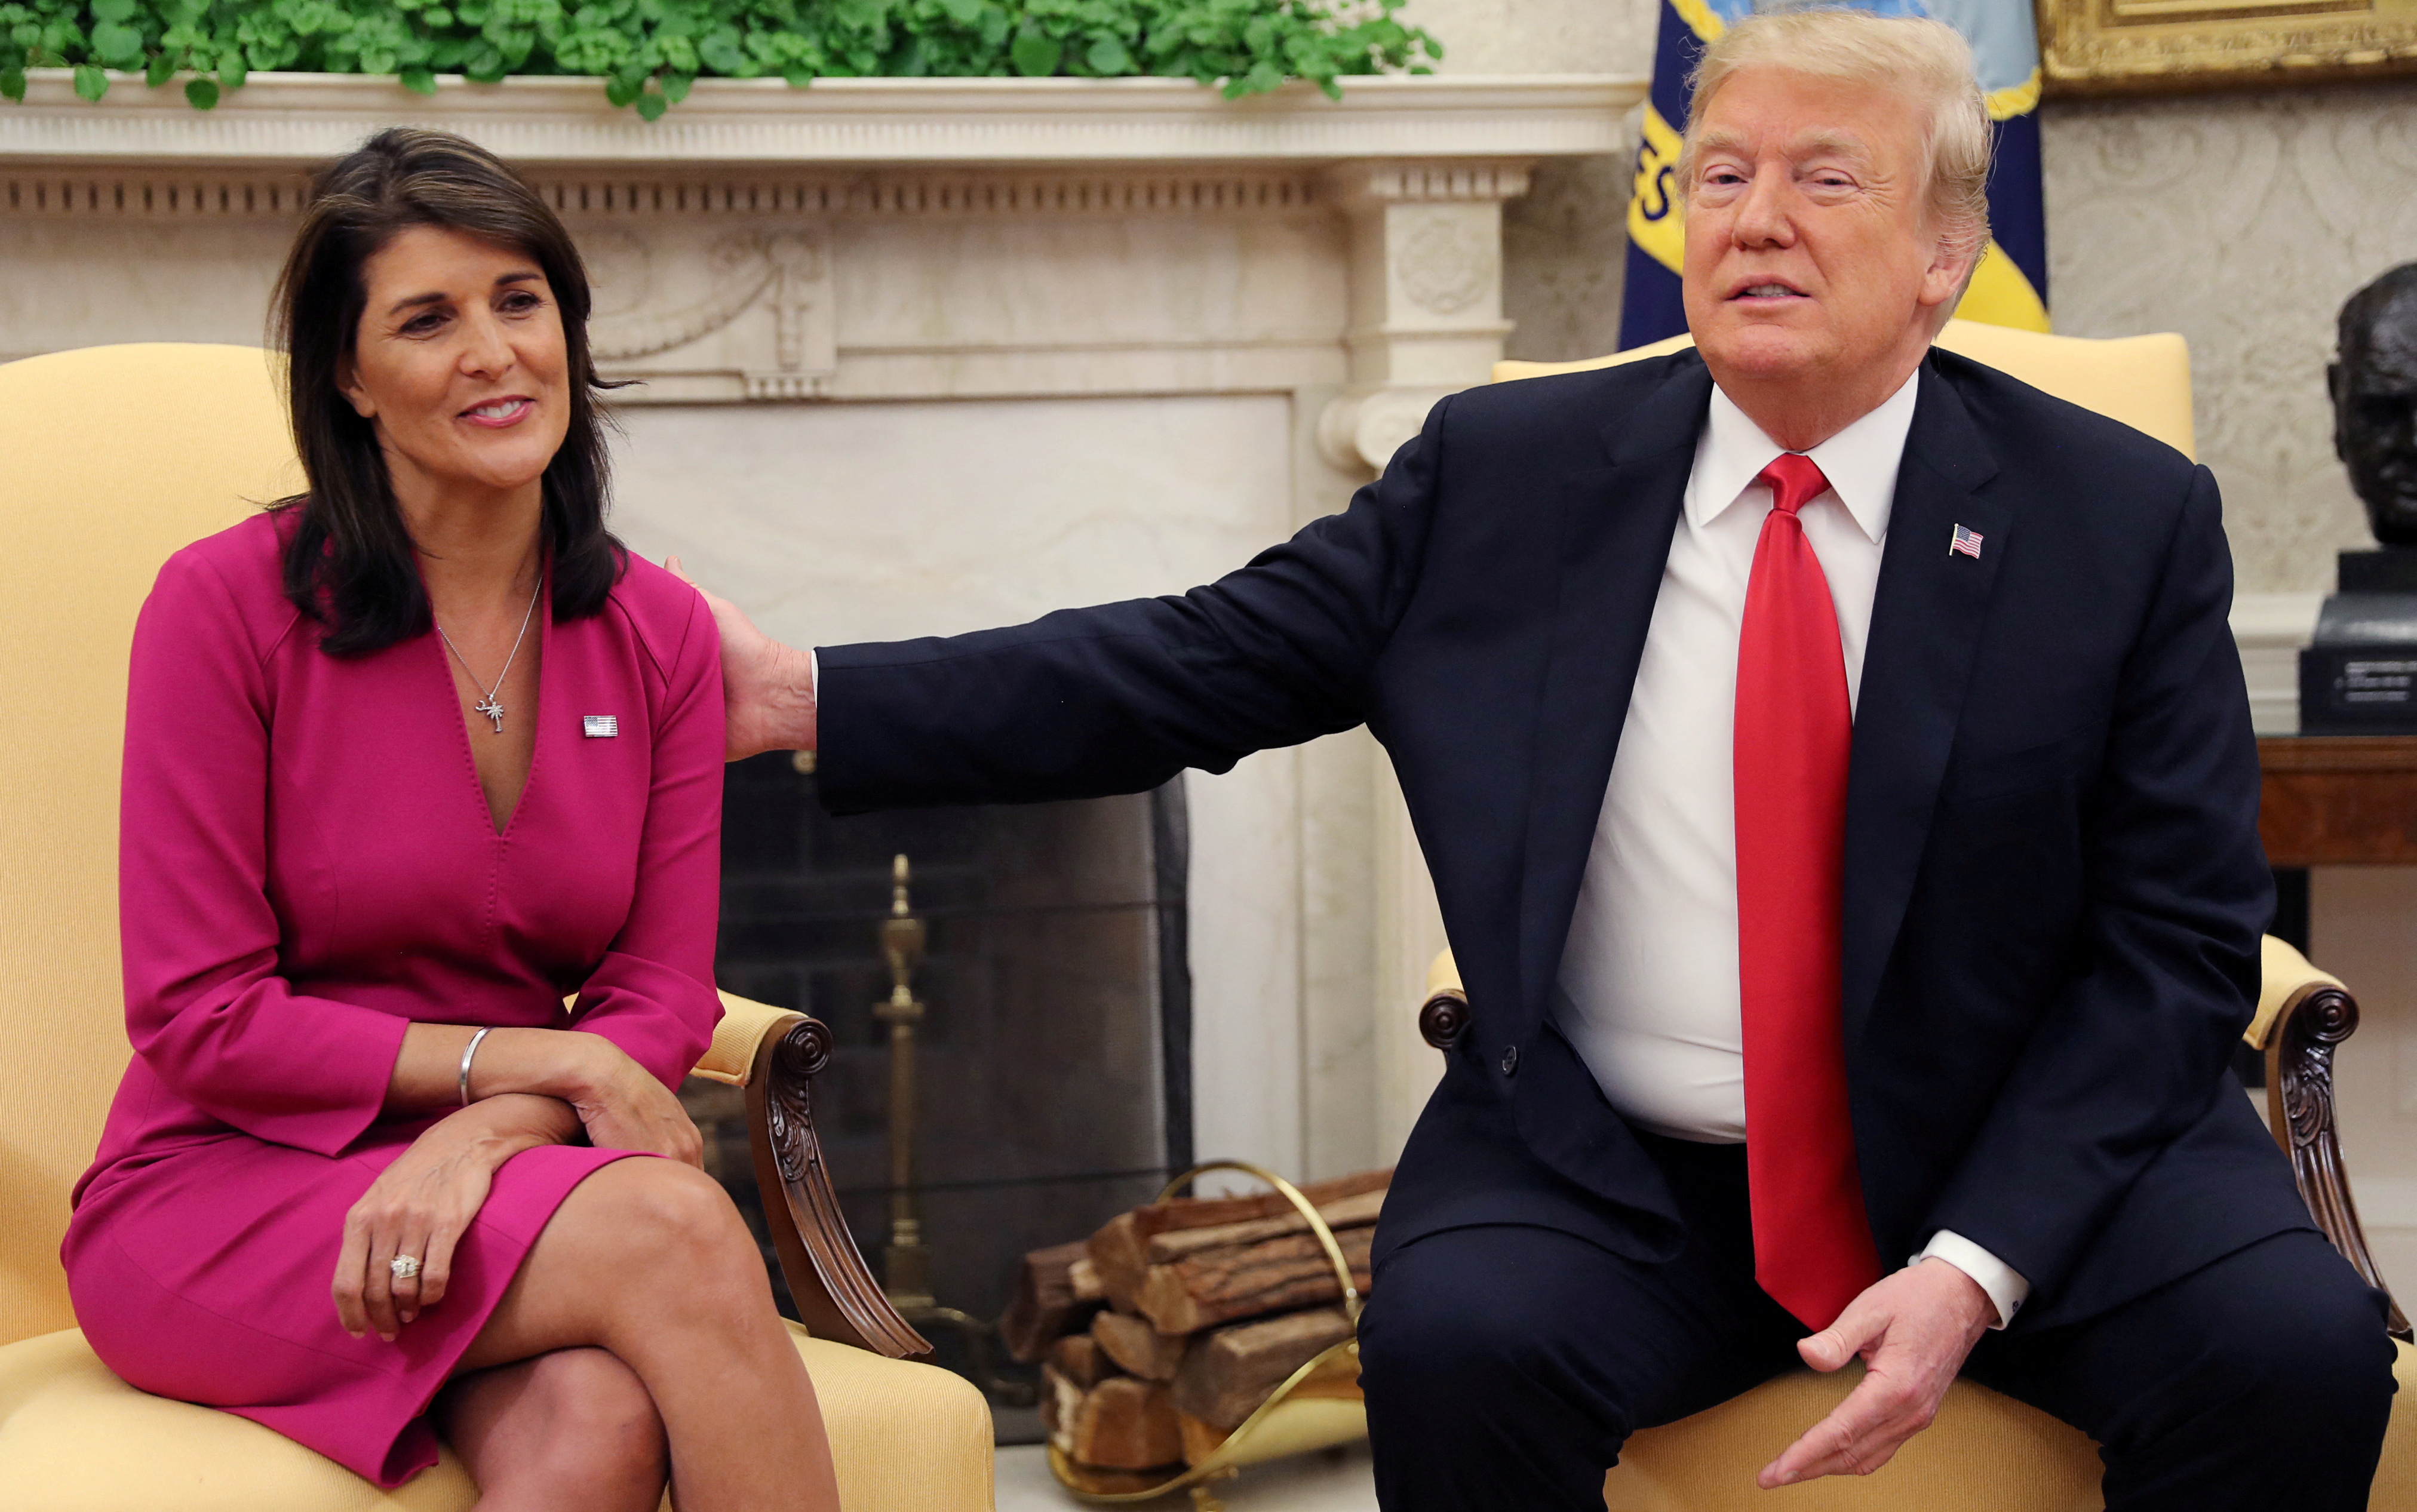 U.S. President Trump reaches out to uutgoing U.S. Ambassador to the U.N. Haley as they meet in the Oval Office of the White House in Washington